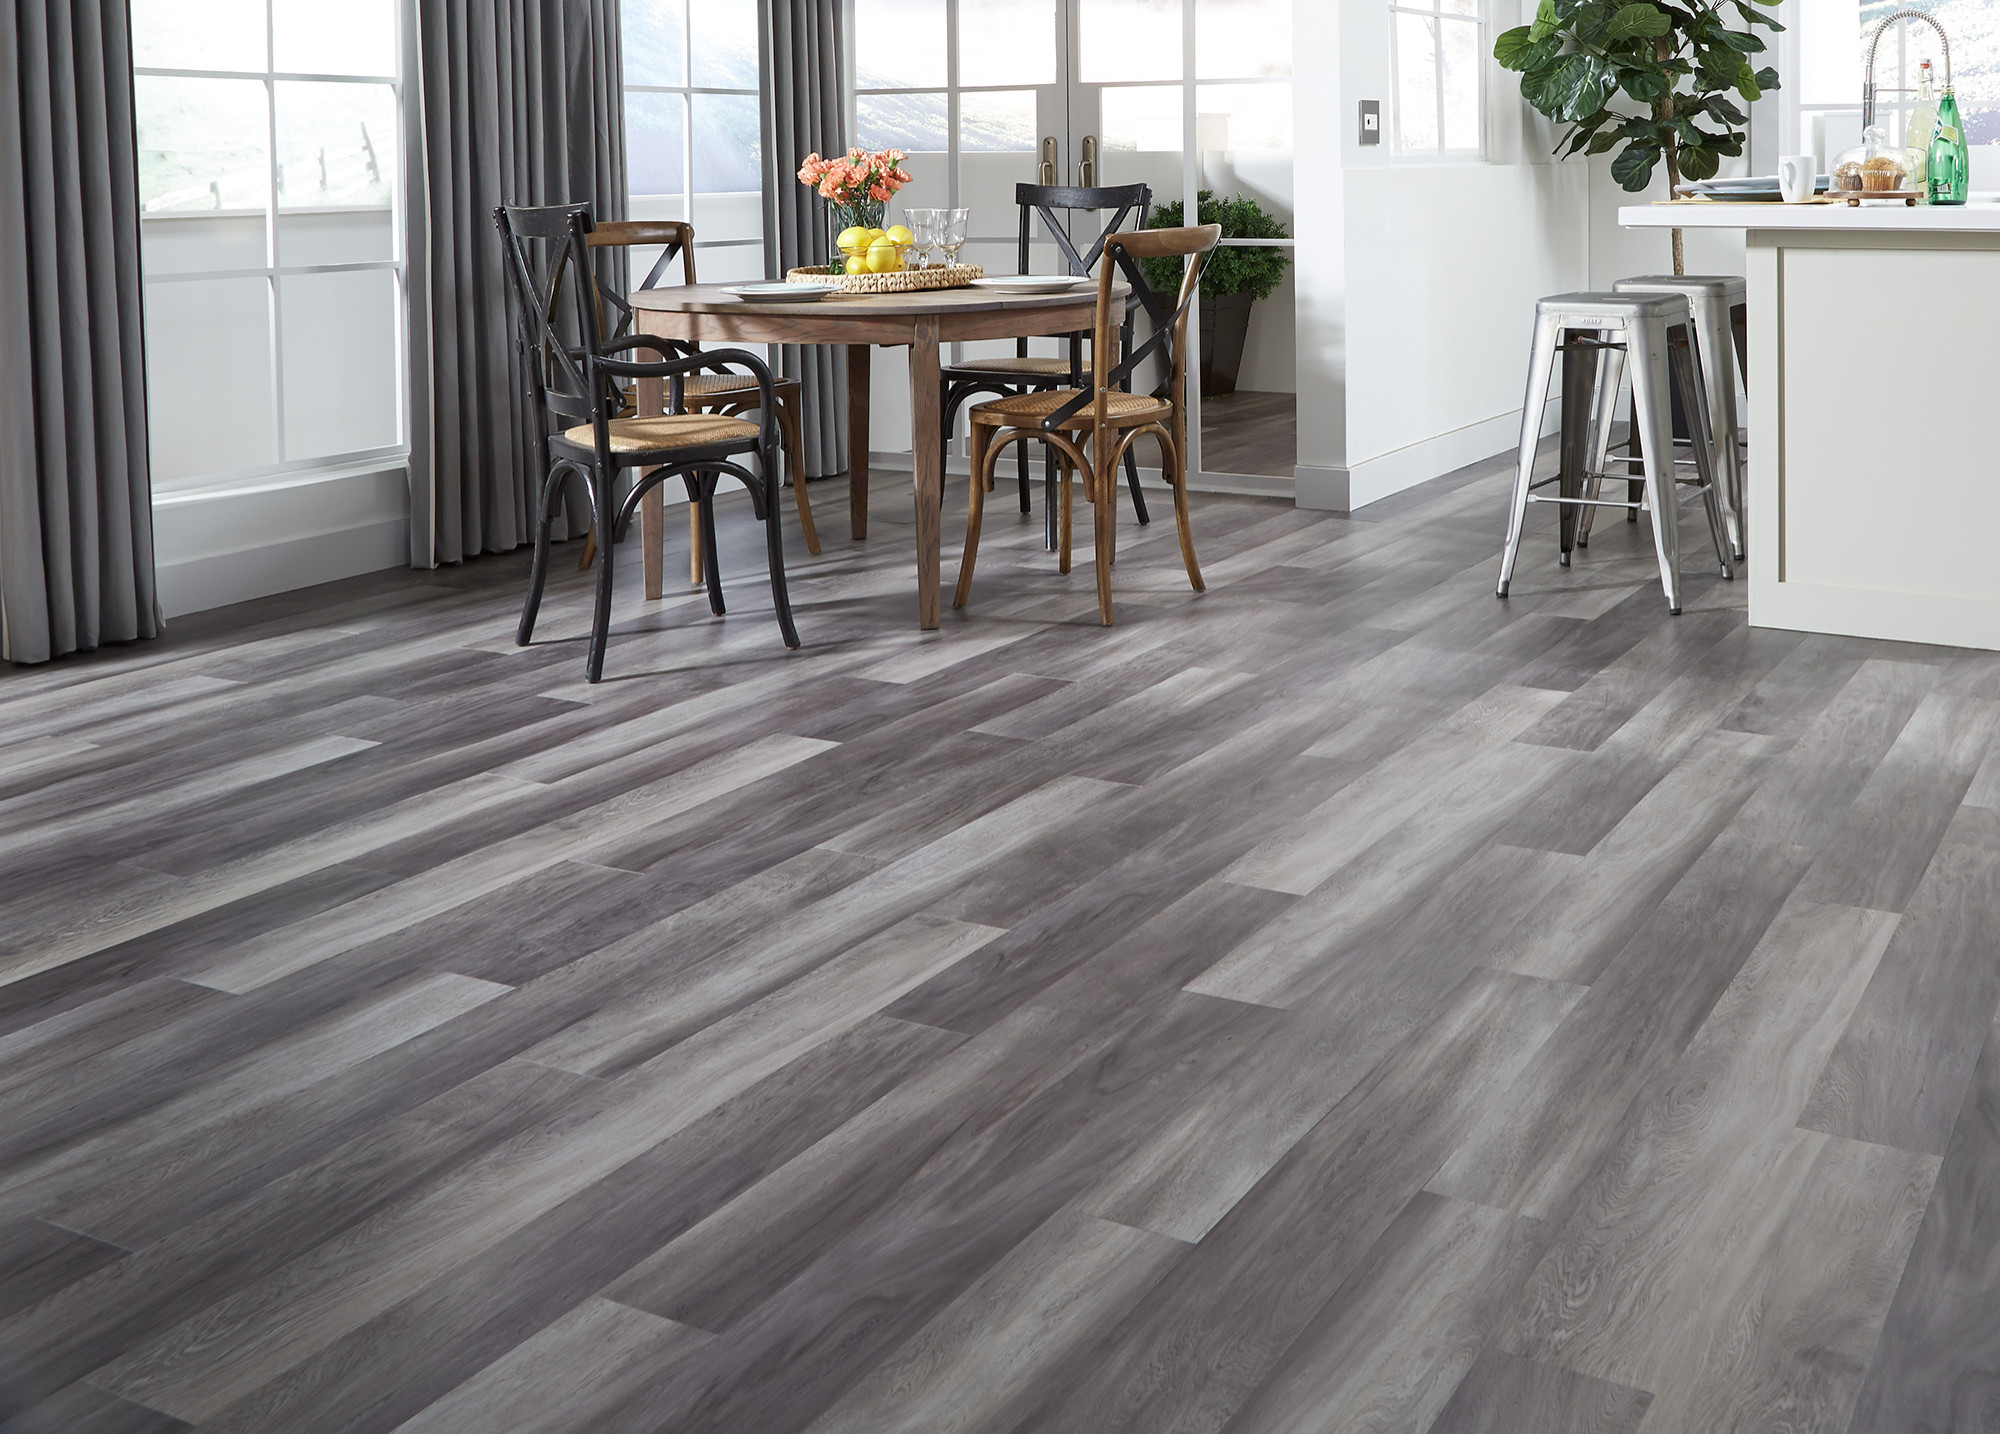 Tranquility 3mm Stormy Gray Oak Luxury Vinyl Plank Lvp Flooring Contemporary Dining Room Other By Ll Flooring Houzz